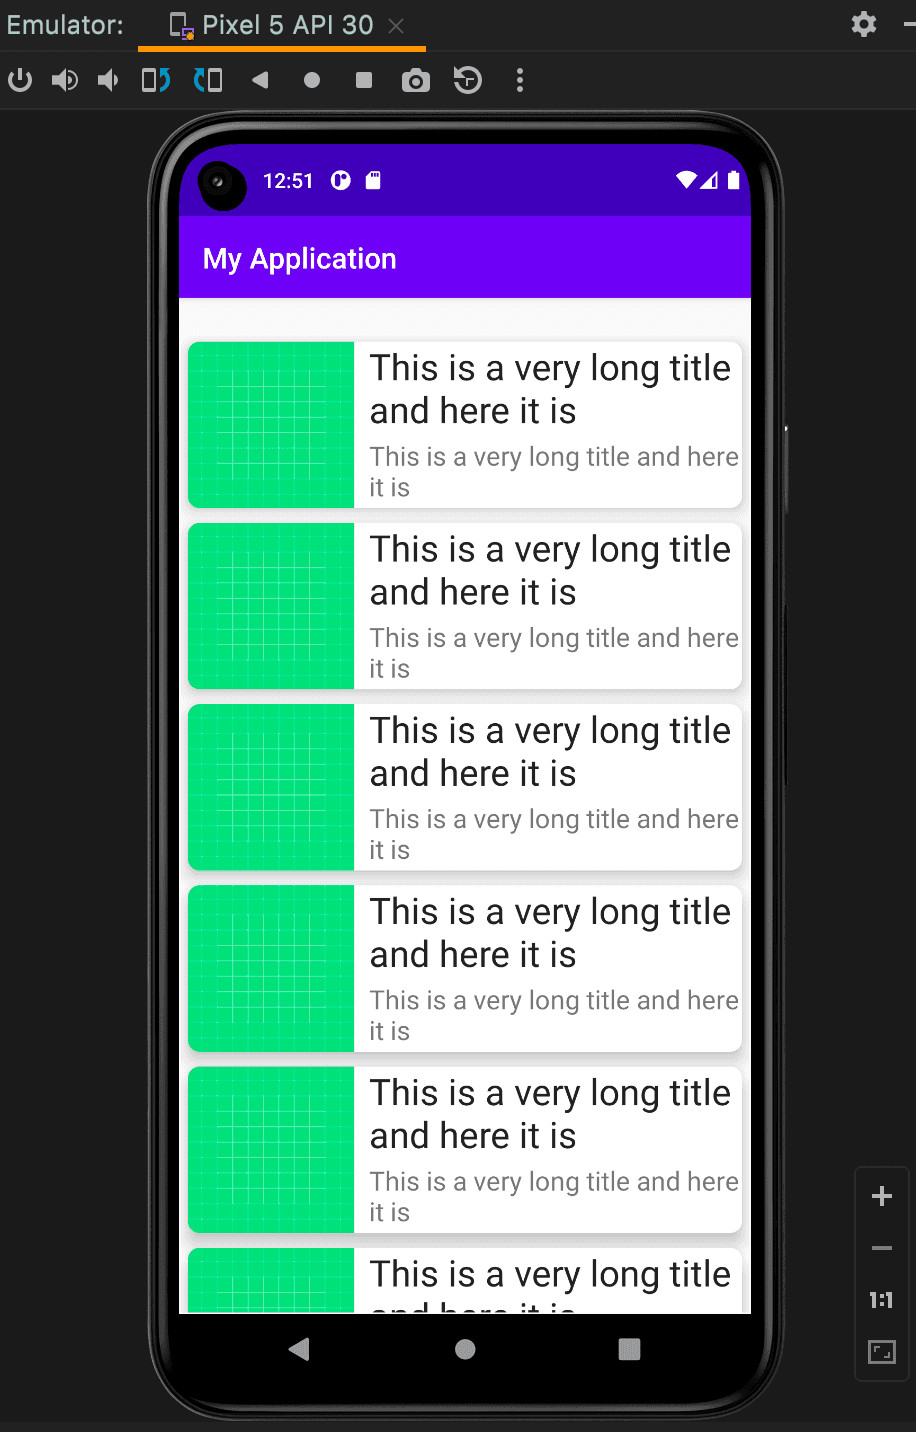 Android recyclerview example